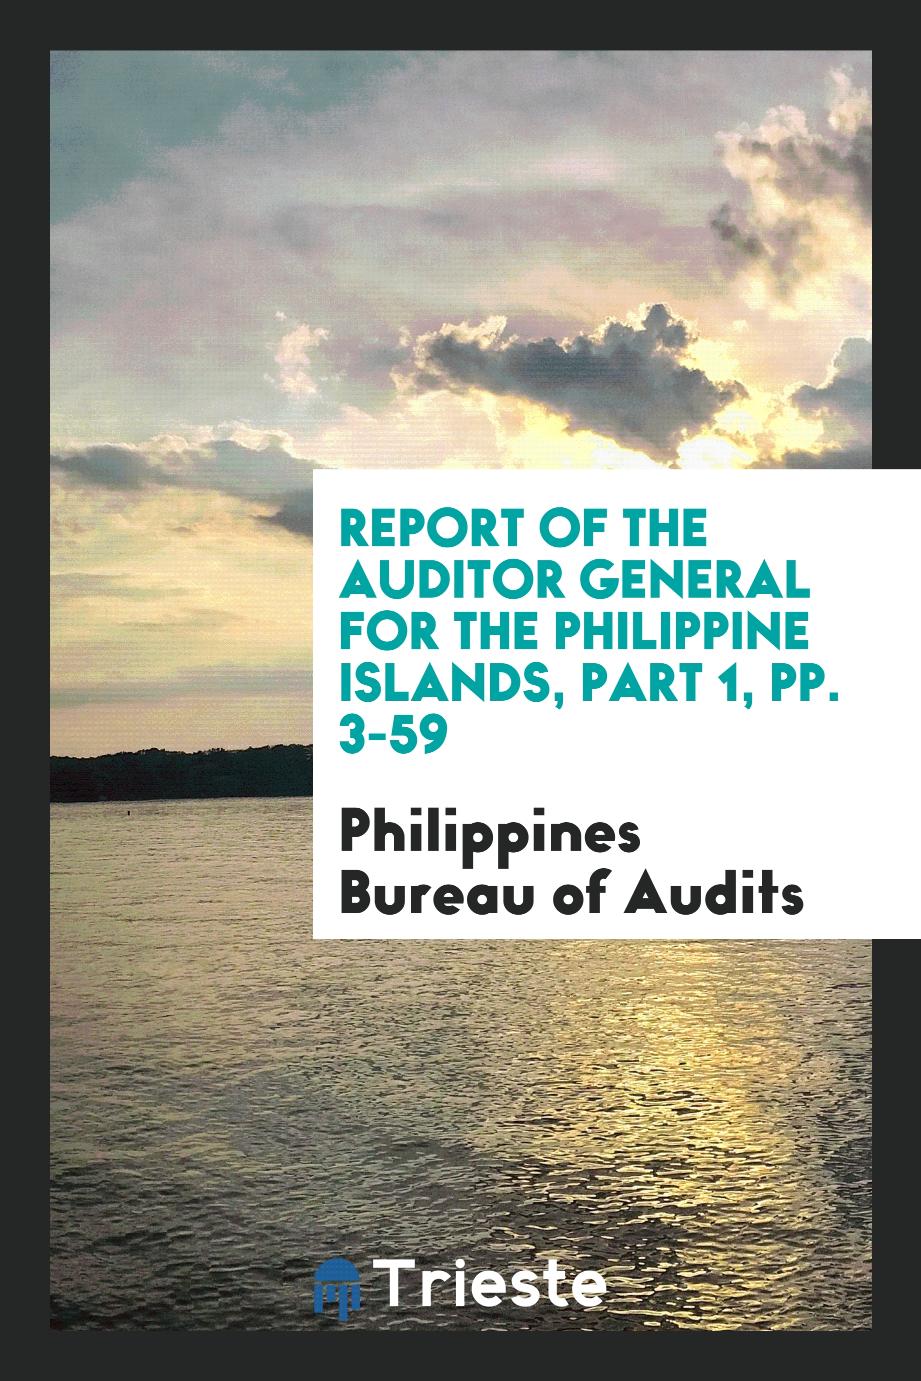 Report of the Auditor General for the Philippine Islands, Part 1, pp. 3-59